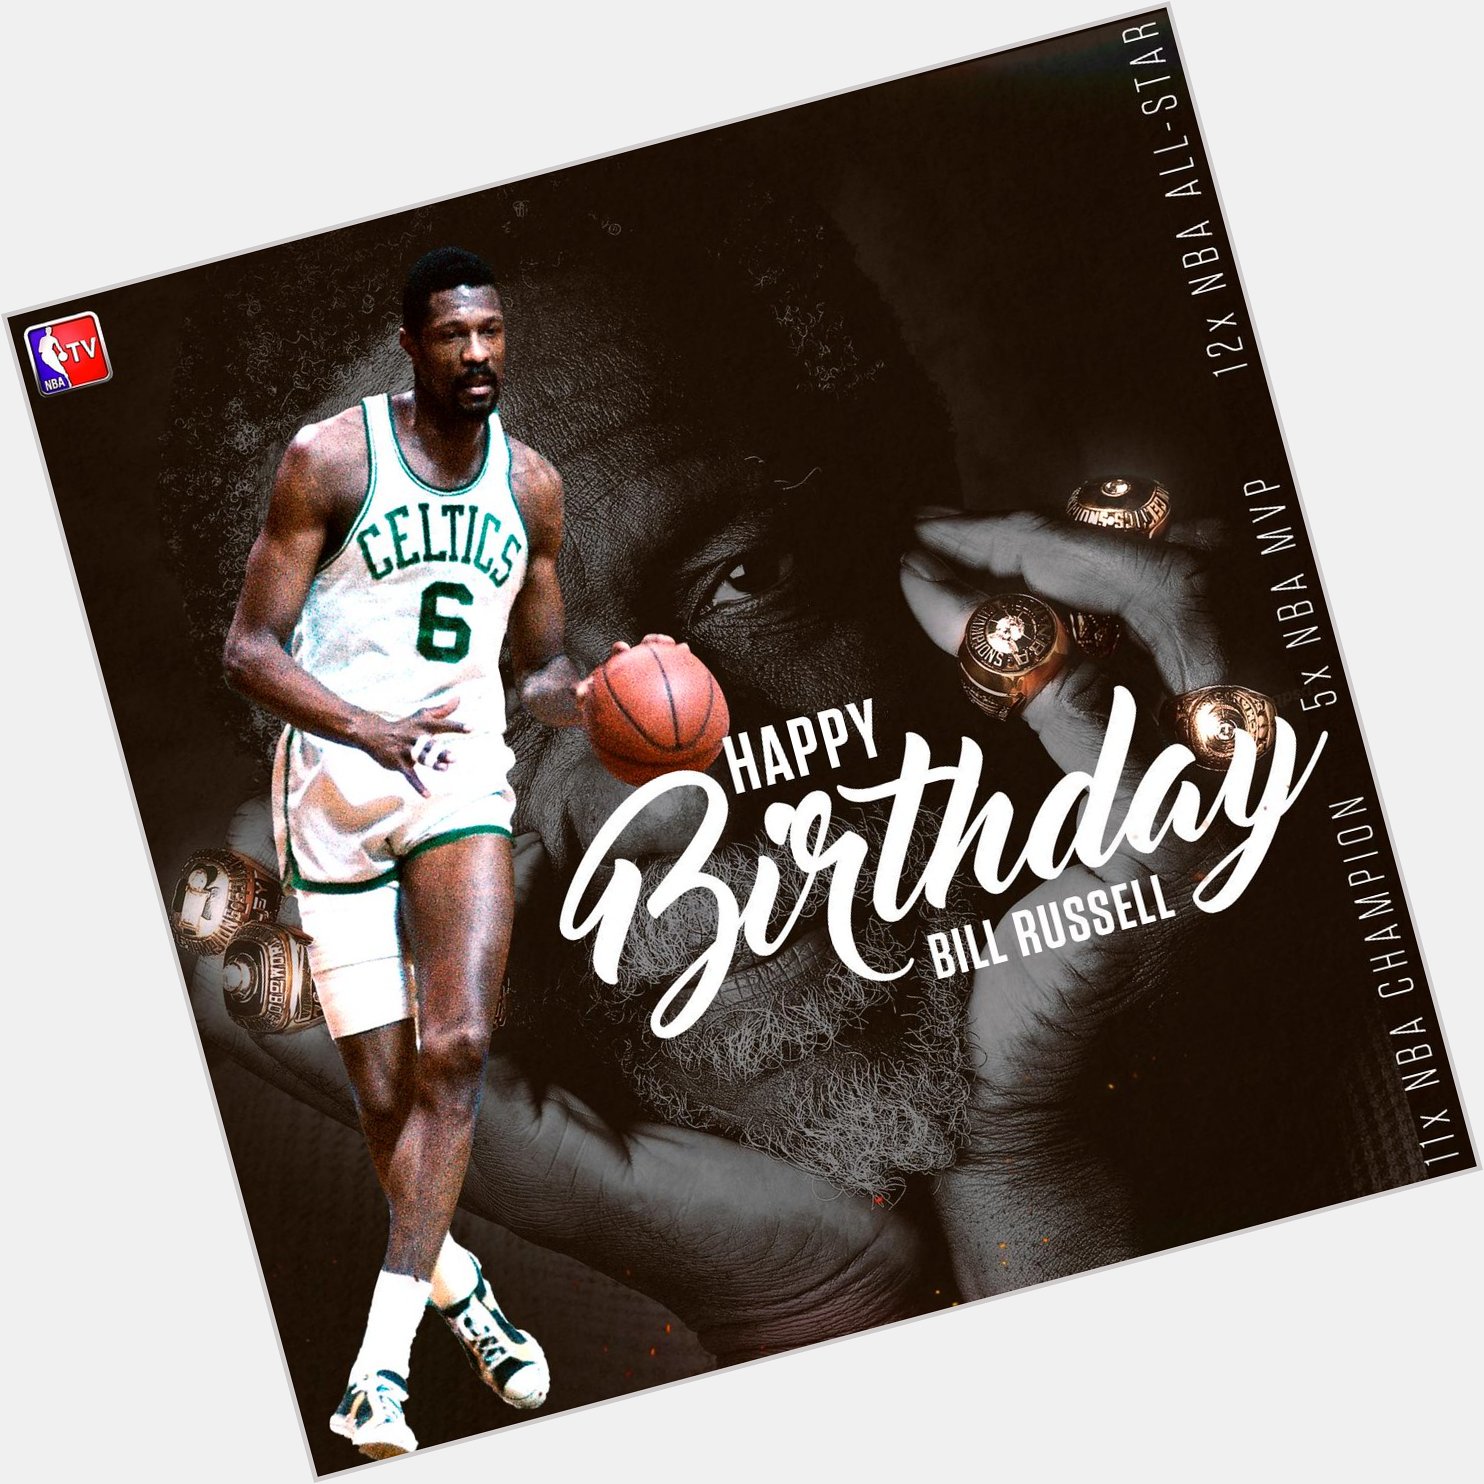 Join us in wishing Hall of Famer & legend Bill Russell a Happy 83rd Birthday!  